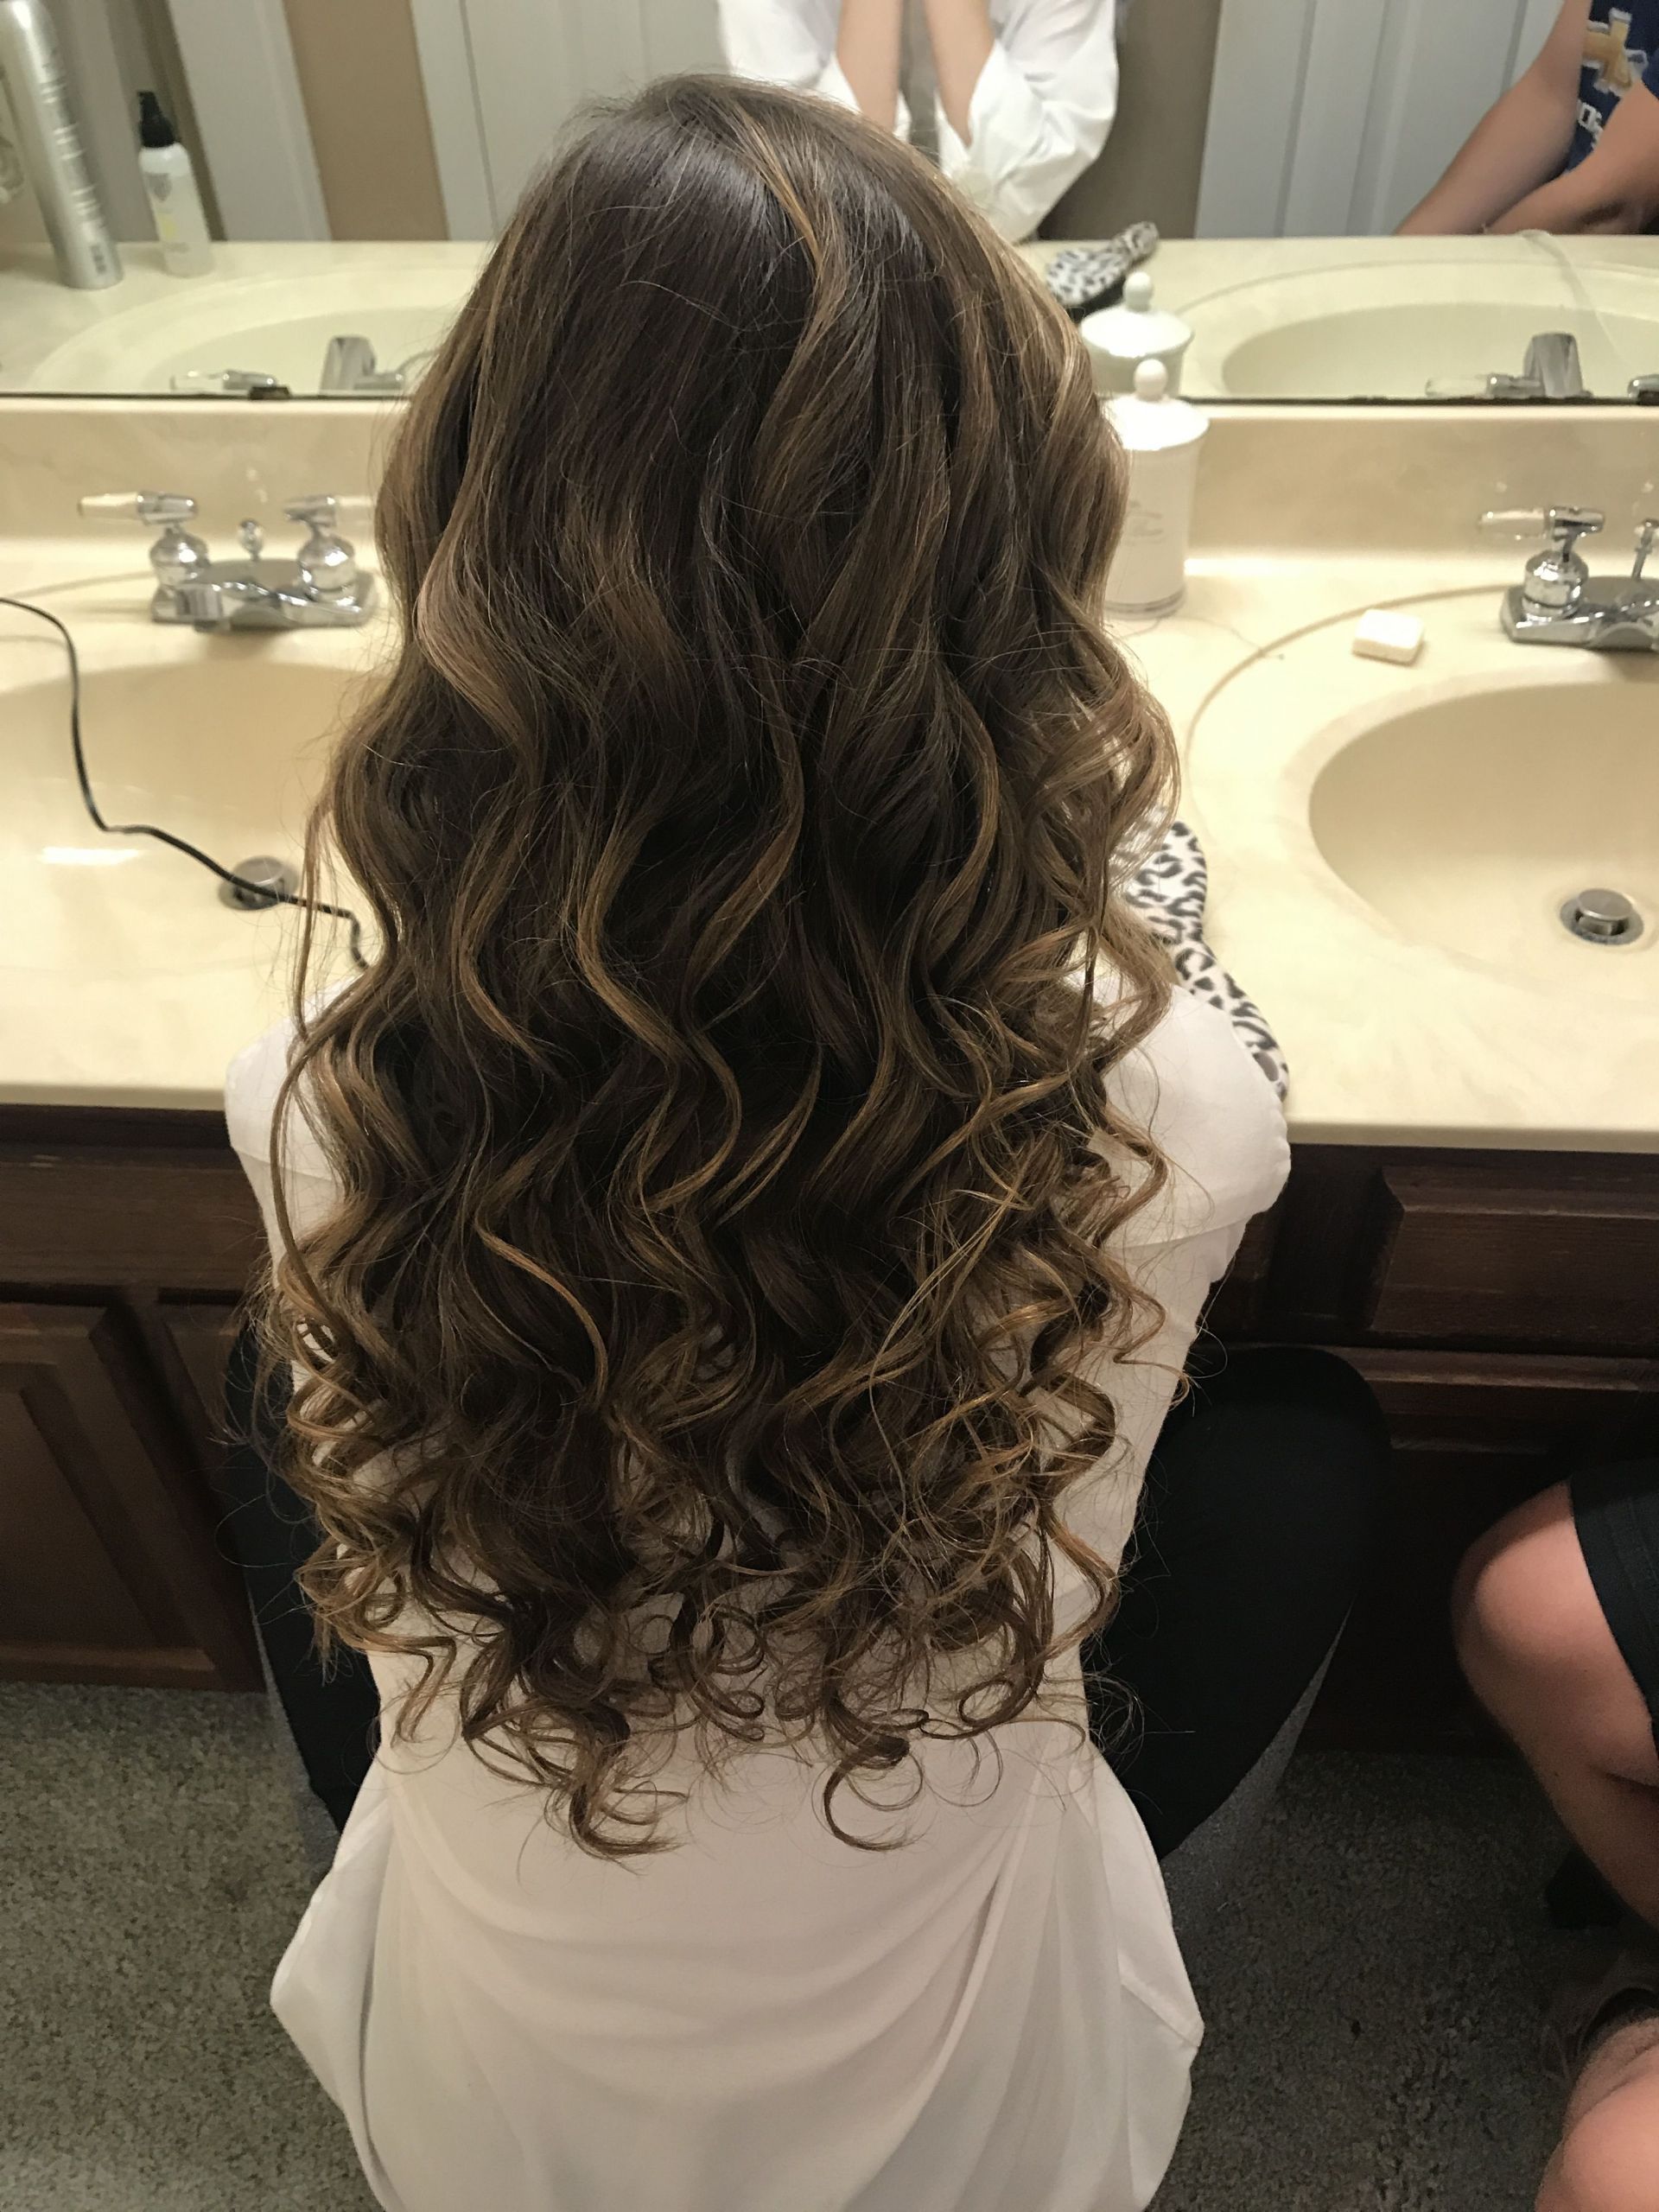 Prom Hairstyle For Long Curly Hair
 Home ing hair curls home ing prom highlights